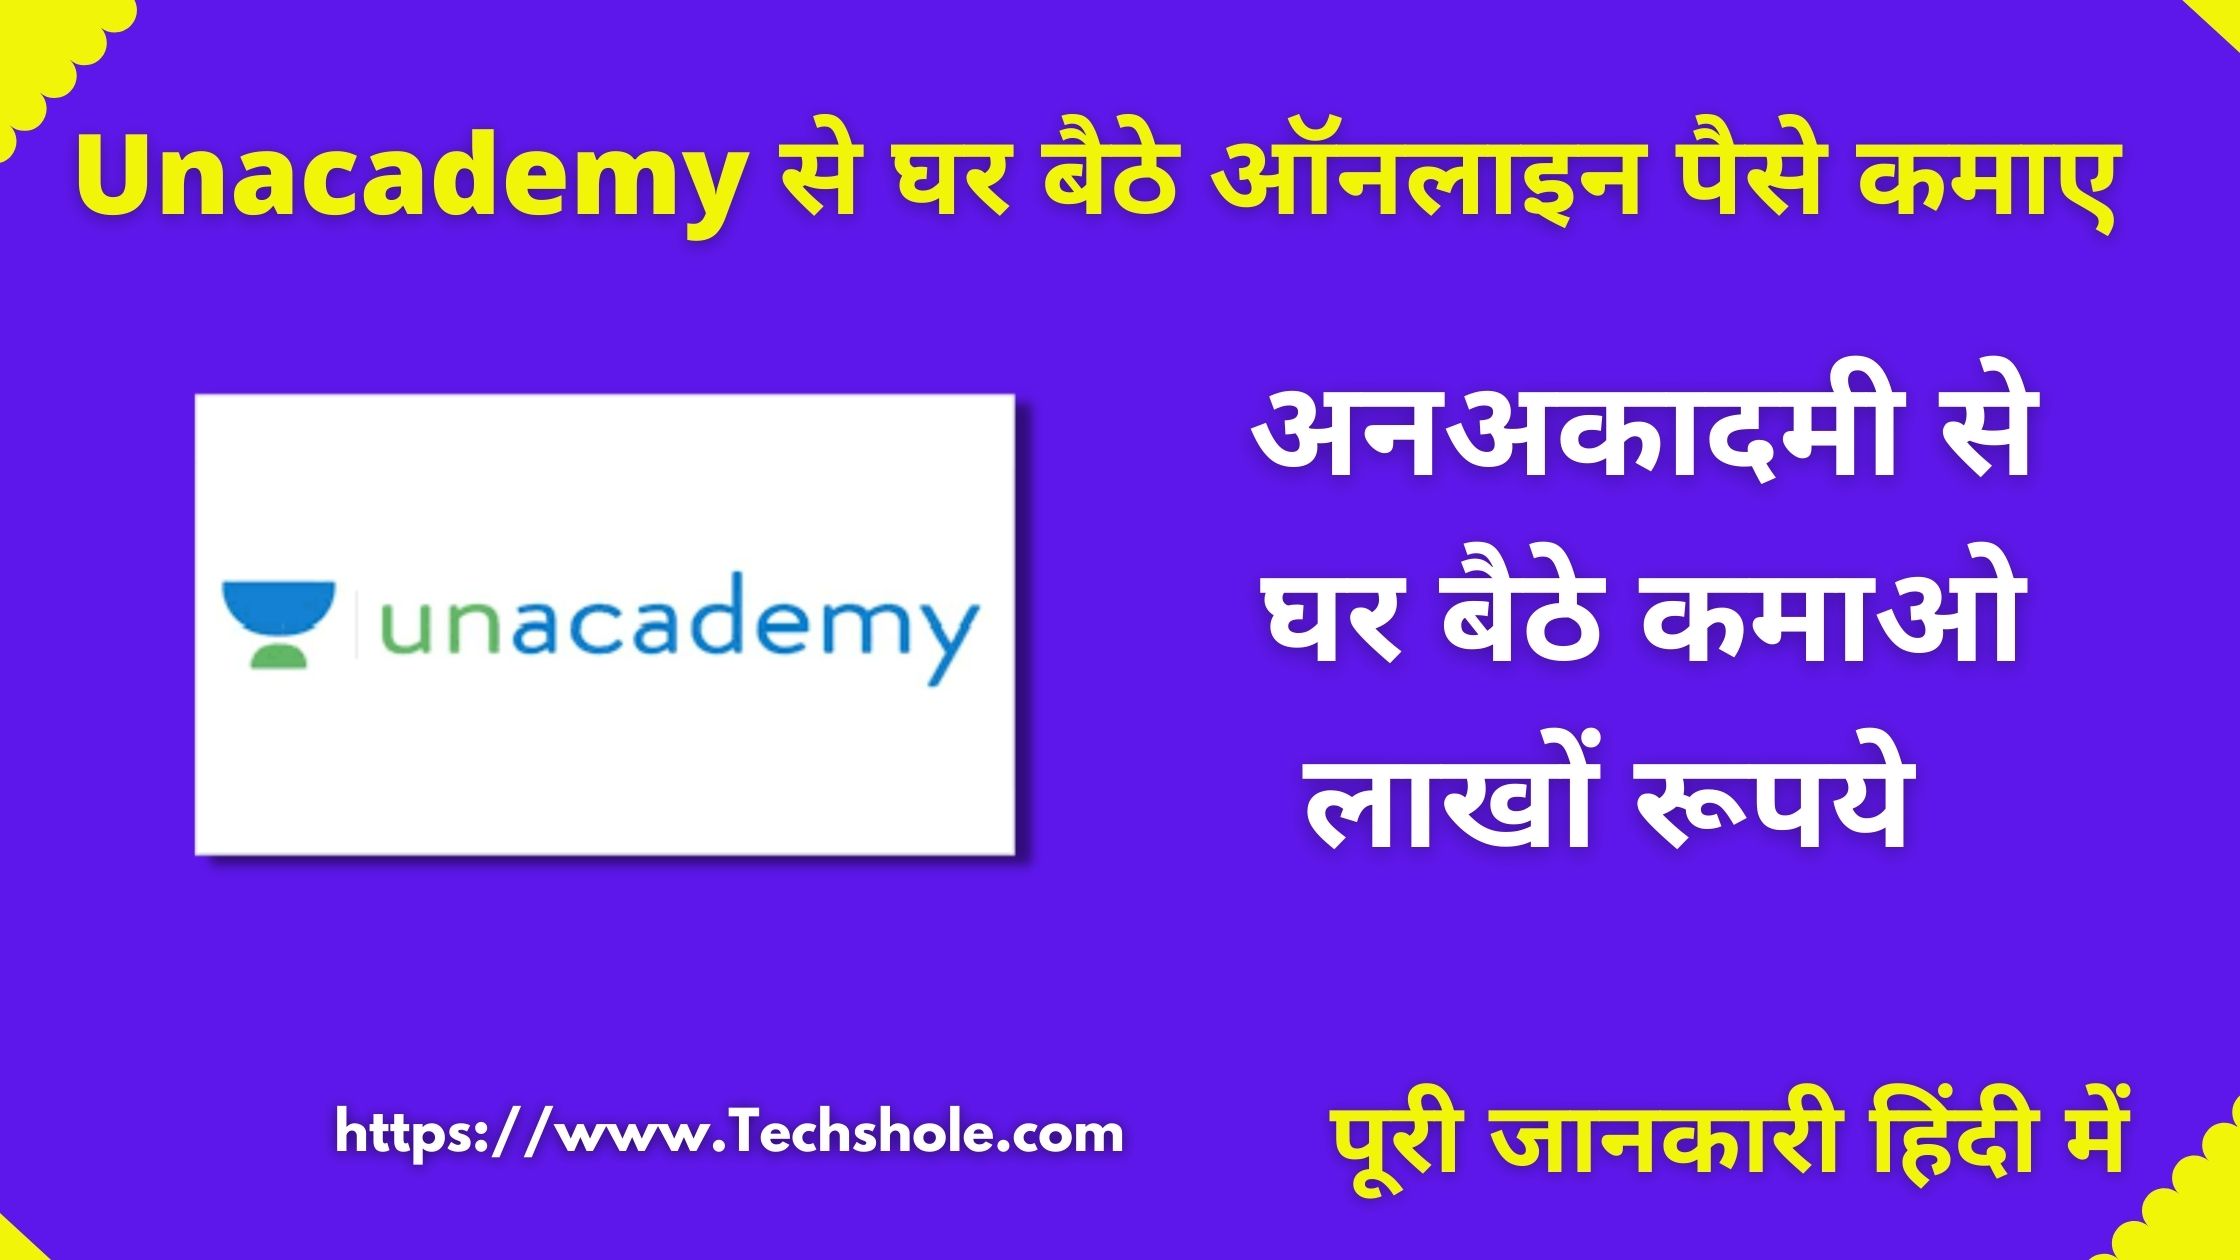 Unacademy Se Paise Kaise Kamaye – Earn money by studying online